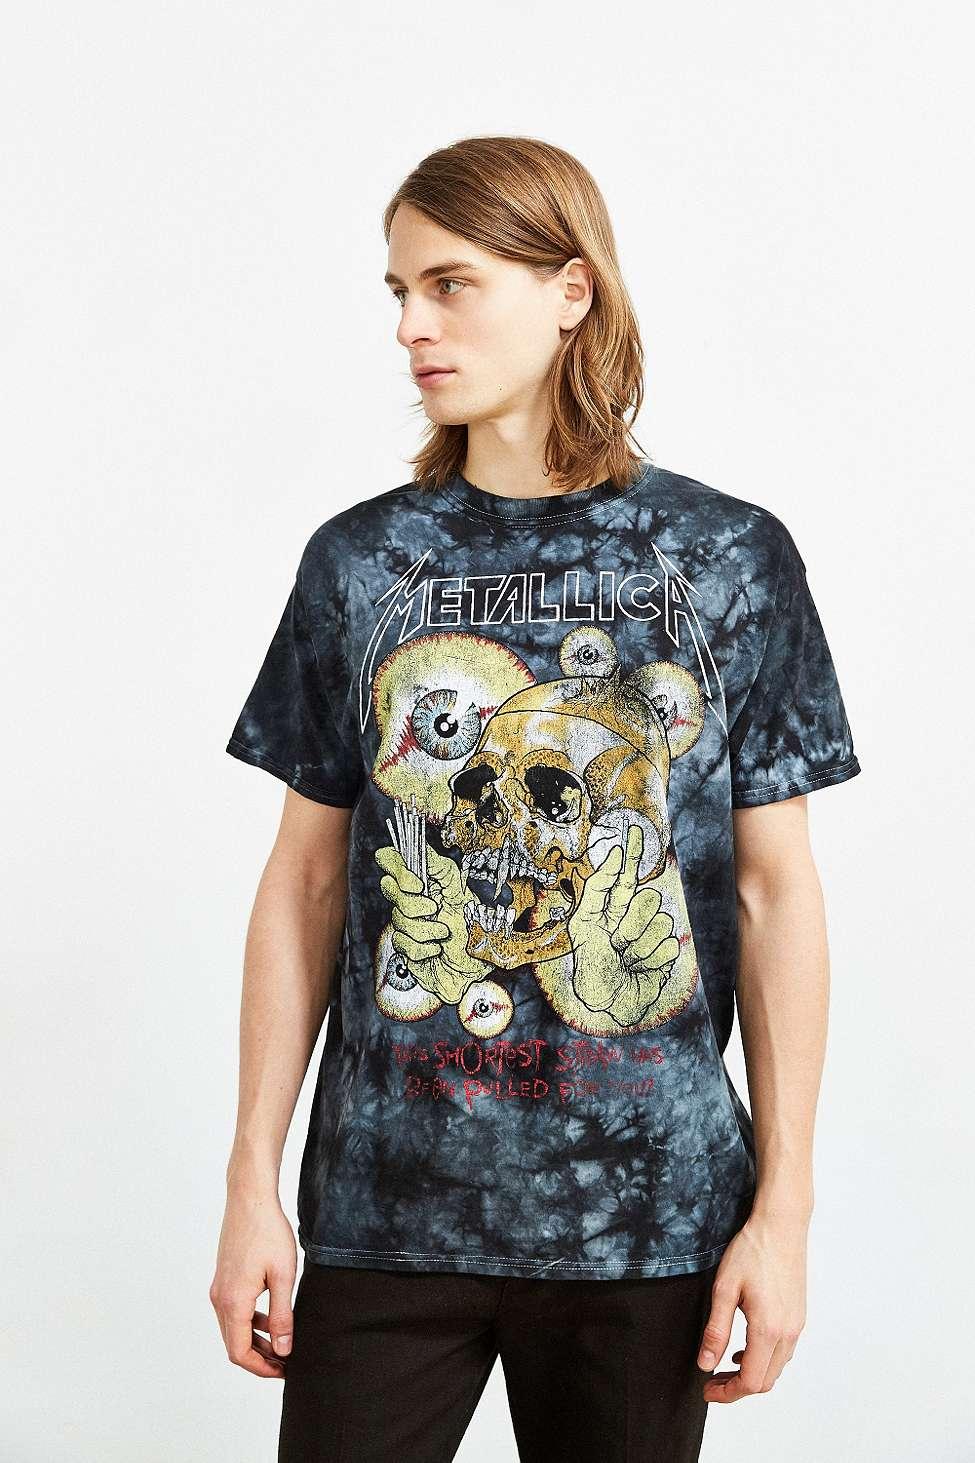 England wear rock band tees urban outfitters 2017 annual key west